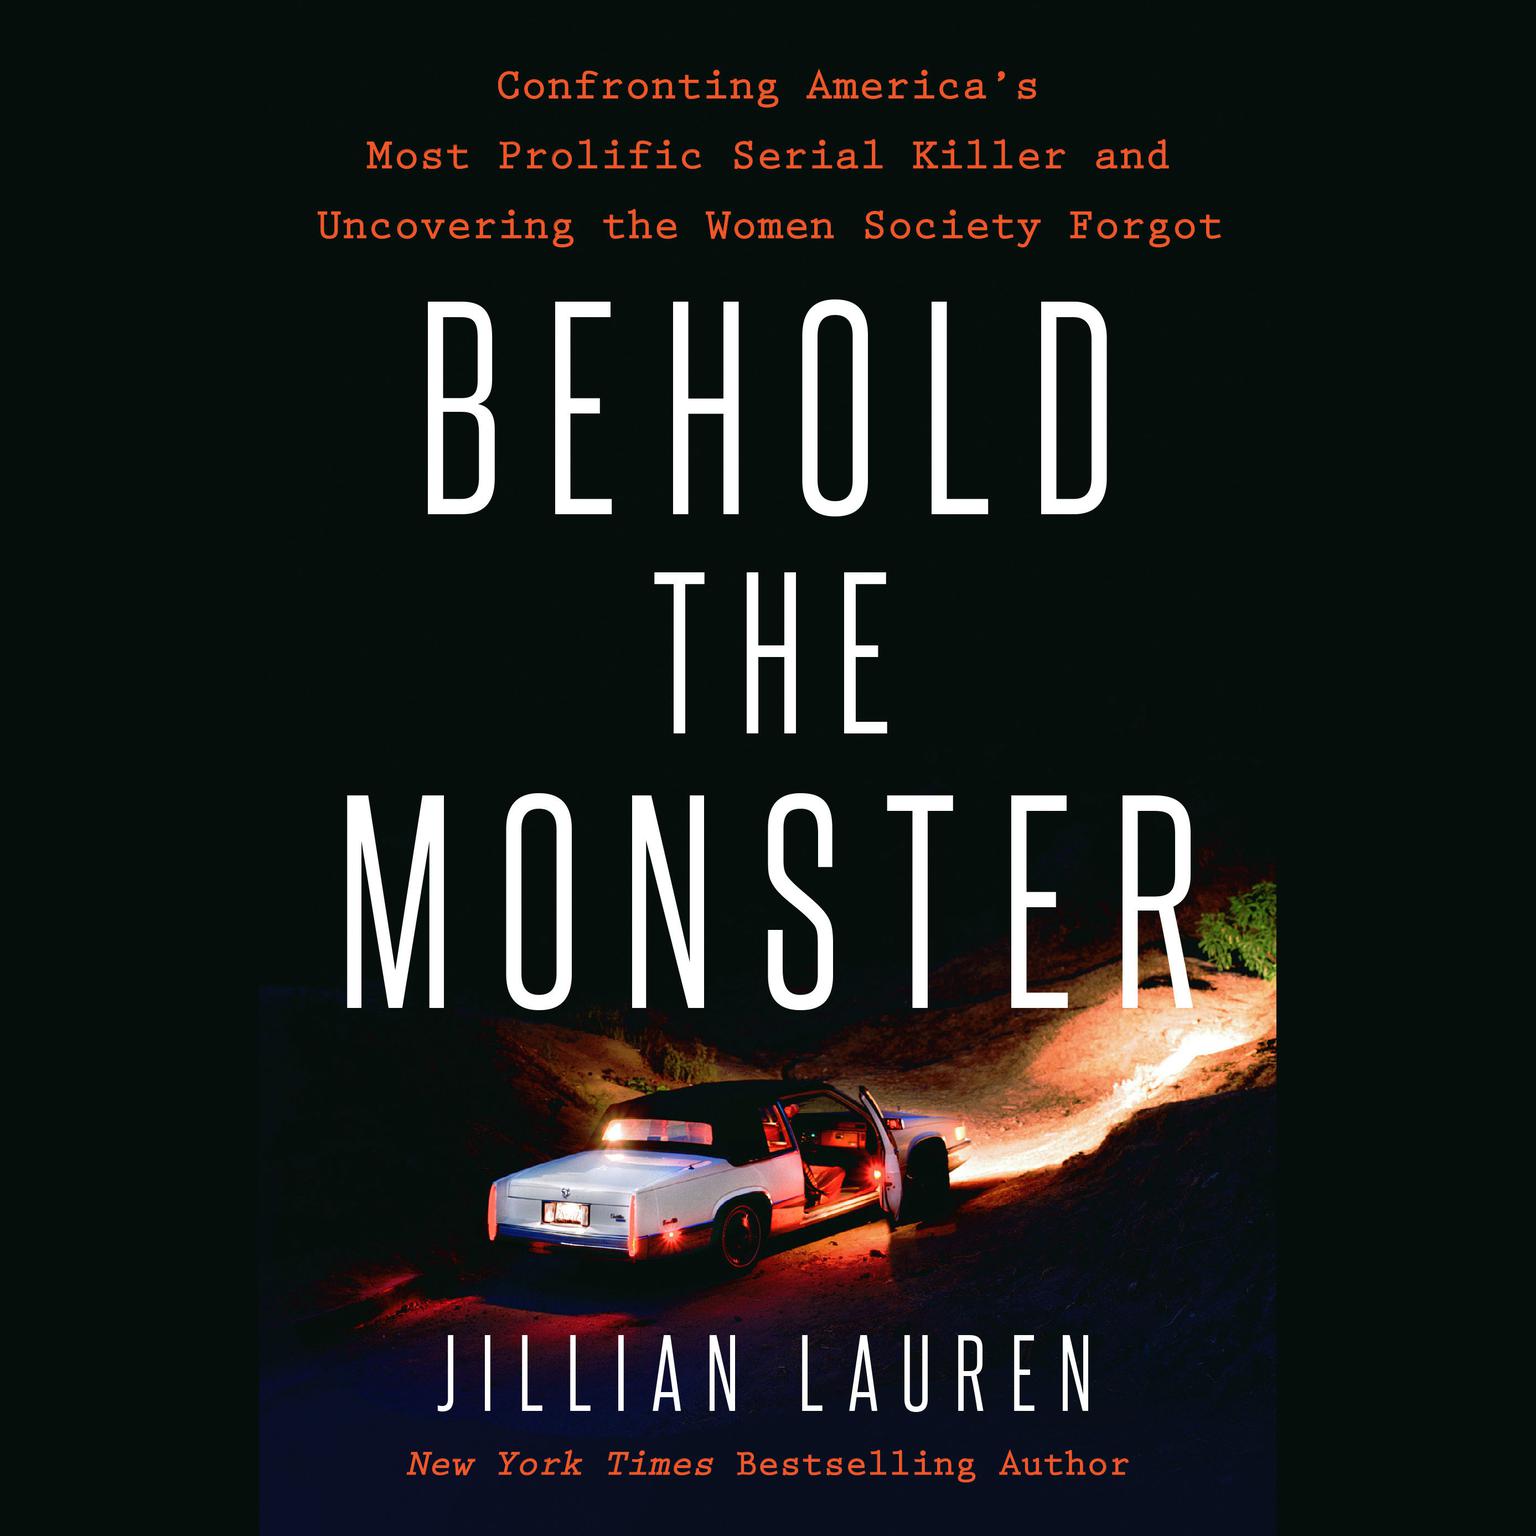 Behold the Monster: Confronting Americas Most Prolific Serial Killer and Uncovering the Women Society Forgot Audiobook, by Jillian Lauren